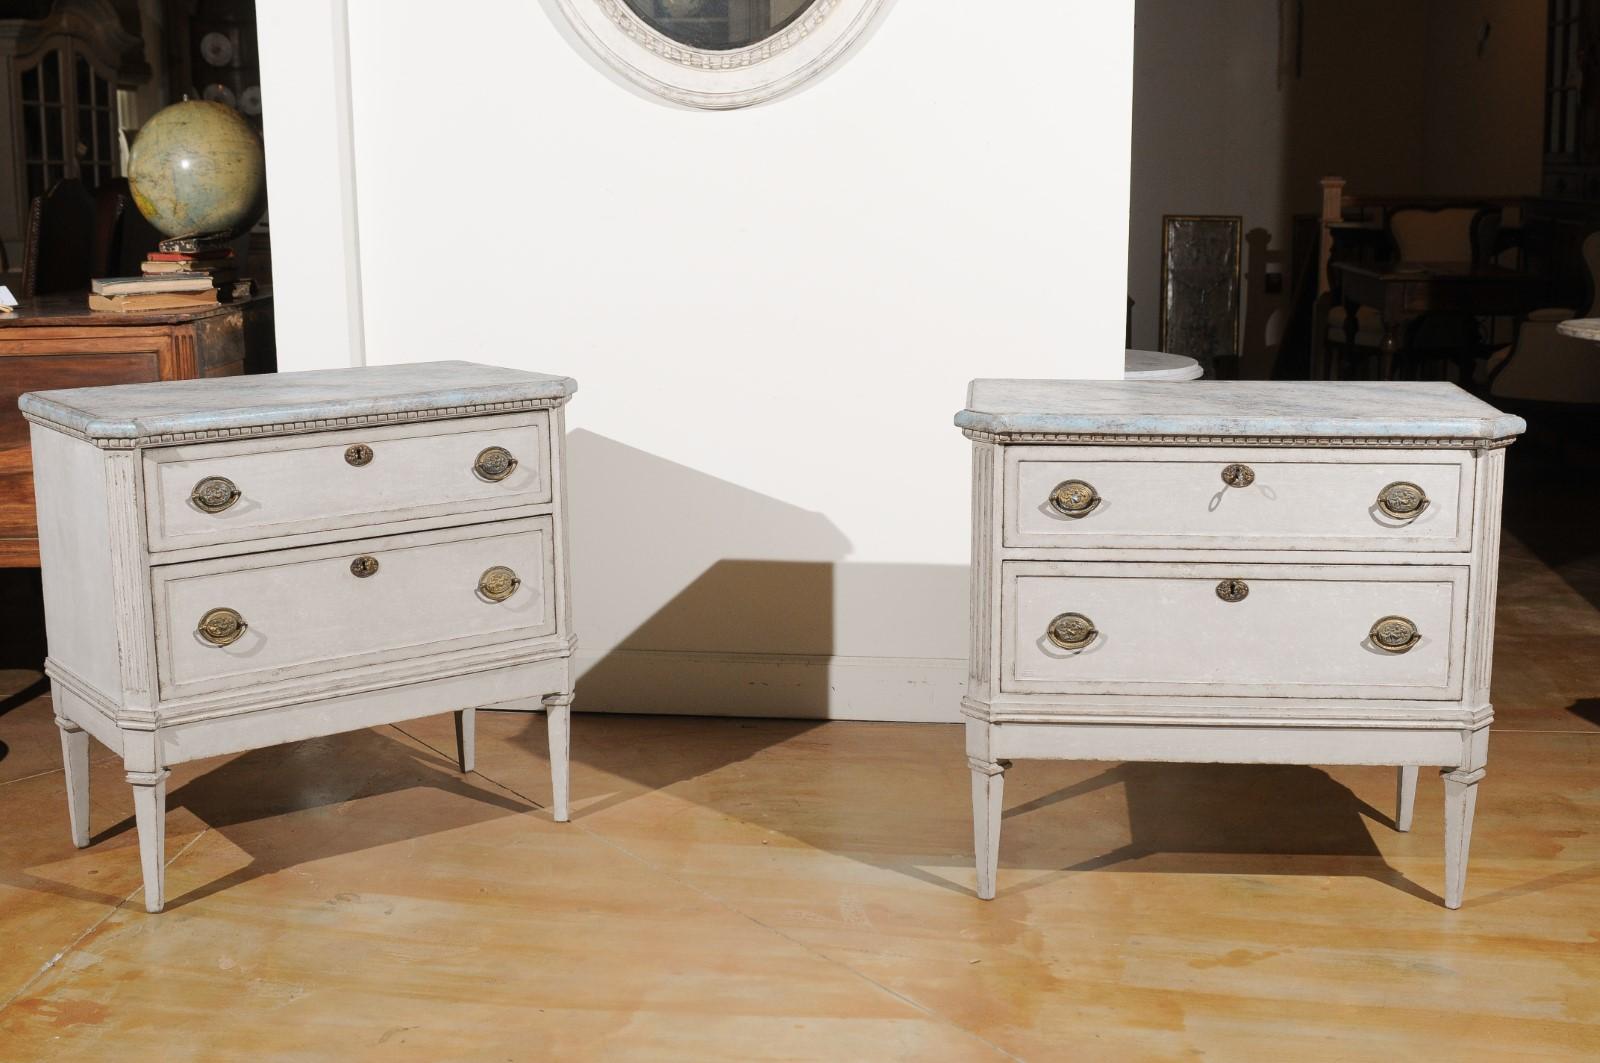 A pair of Swedish Gustavian style painted two-drawer chests from the 19th century, with marbleized tops and fluted motifs. Created in Sweden during the 19th century, each of this pair of Gustavian style chests features a faux marble painted top with